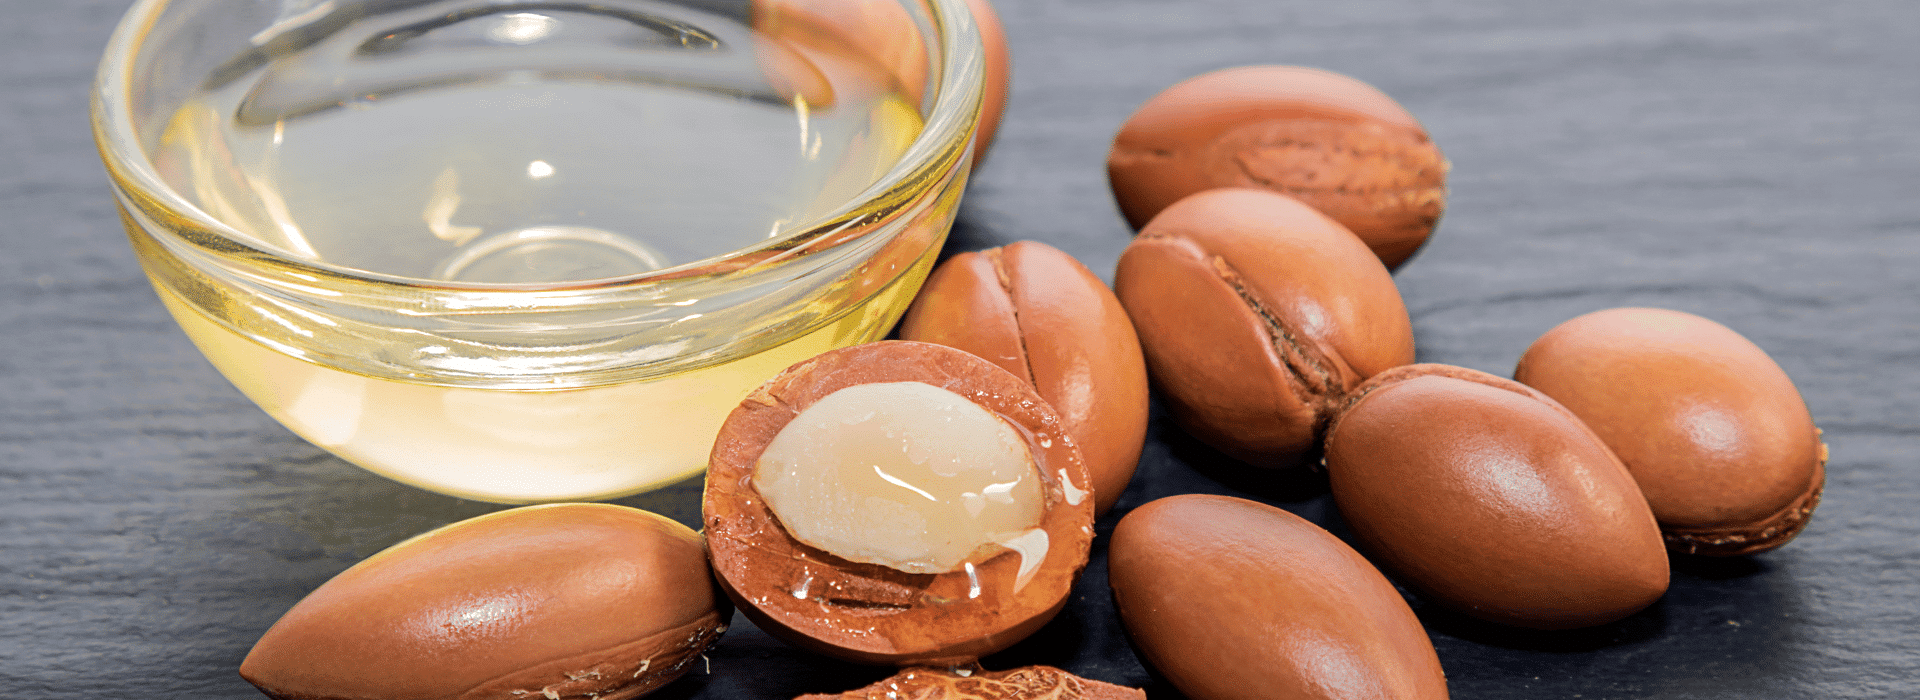 Our Key Ingredients Blog | Argan Nuts and Aragn Oil | Shine Body & Bath